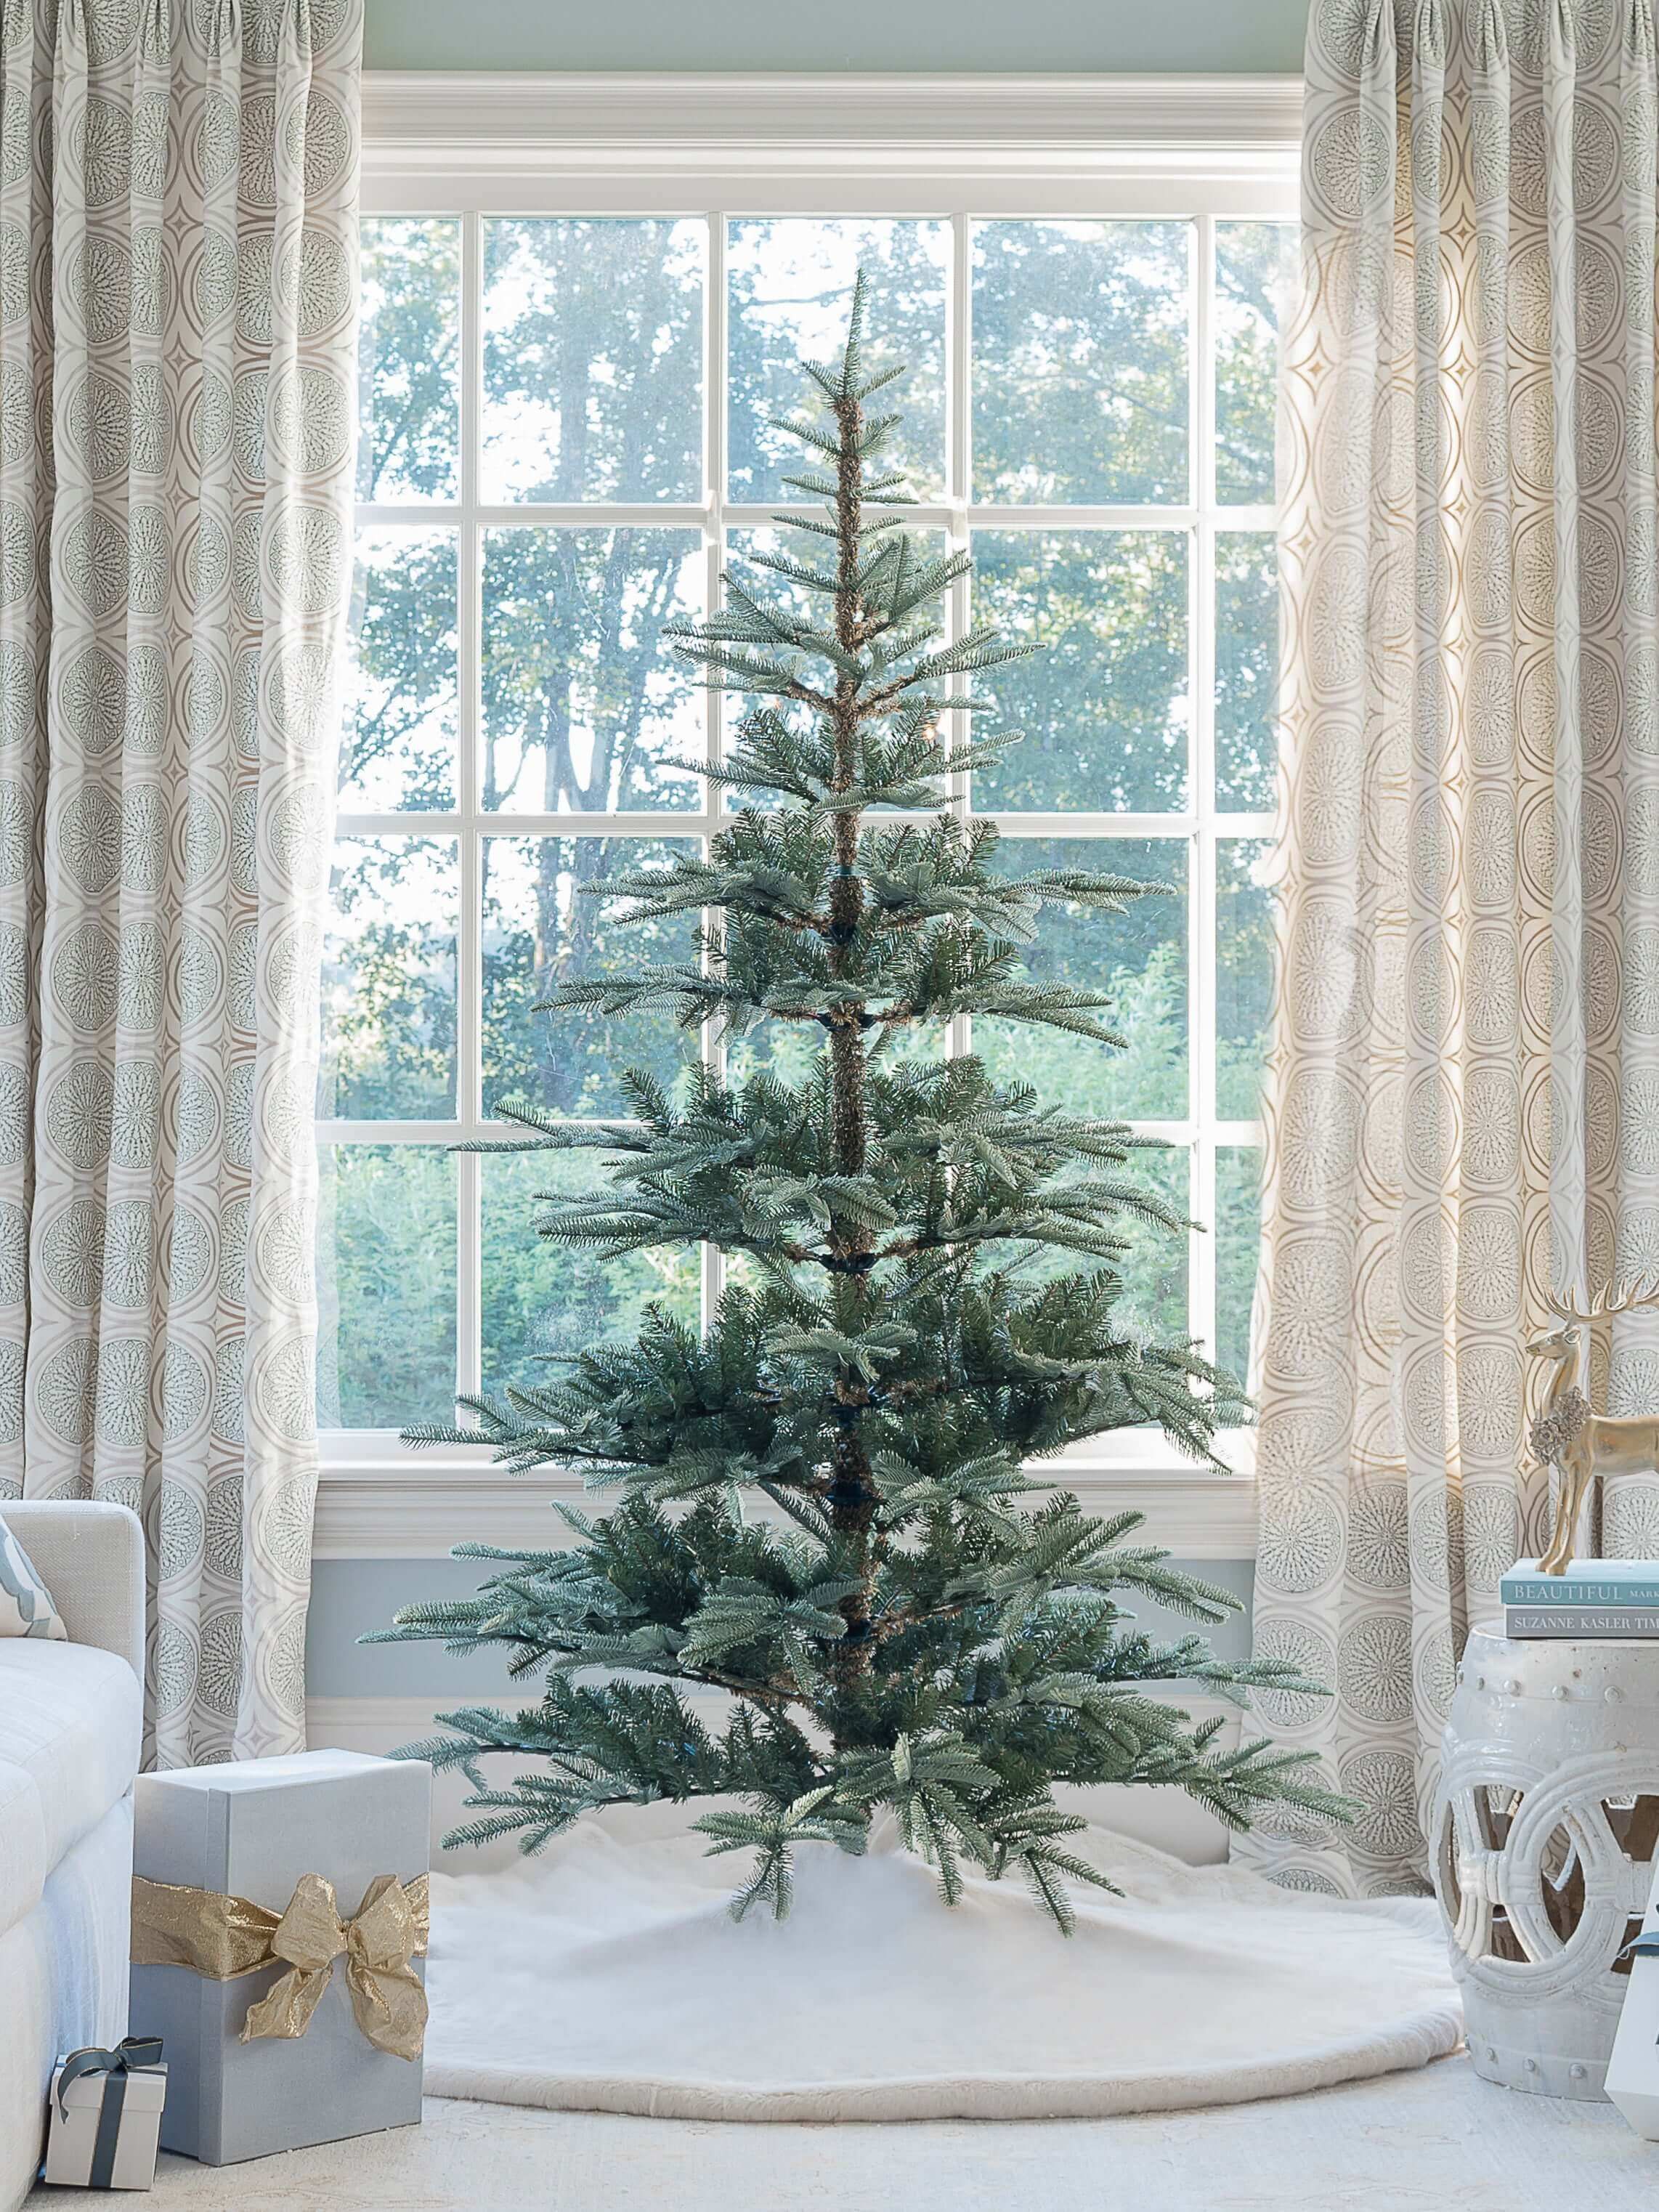 8 Foot King Noble Fir Artificial Christmas Tree Unlit | King of Christmas